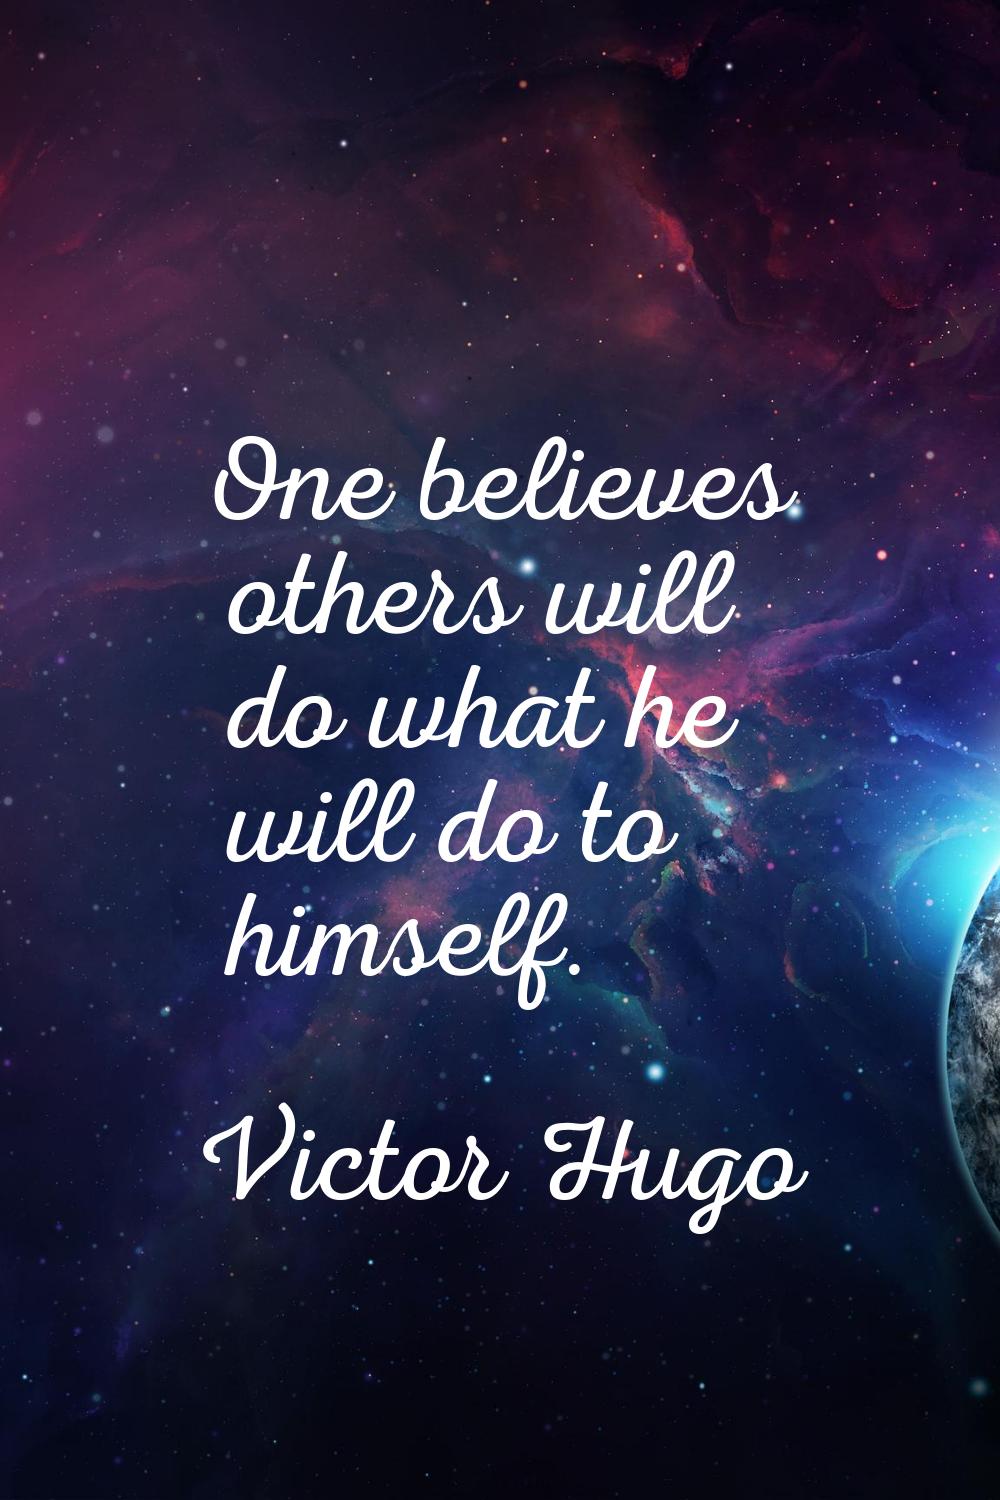 One believes others will do what he will do to himself.